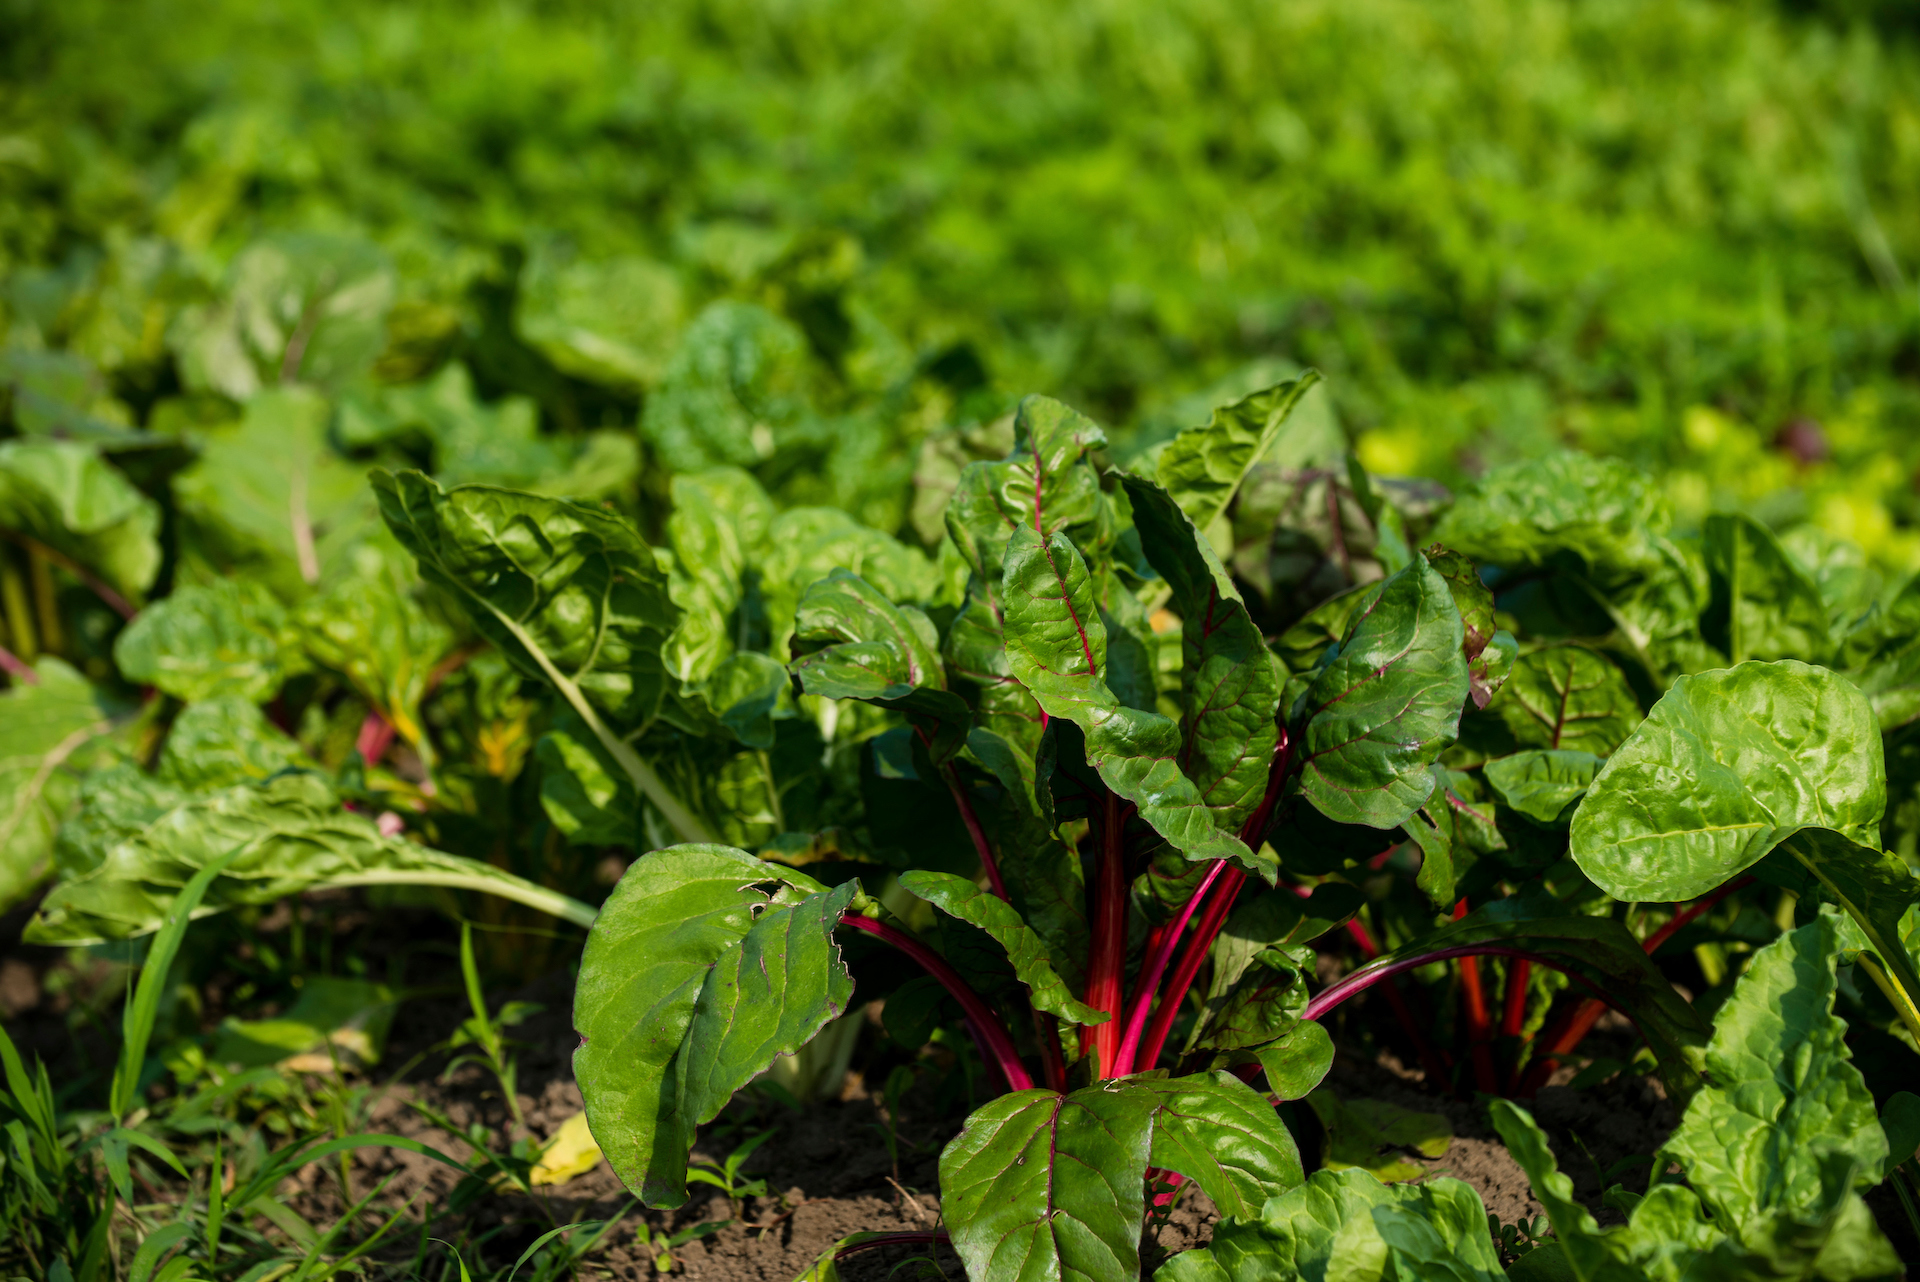 a close up of Swiss chard with bright red stems growing in a field